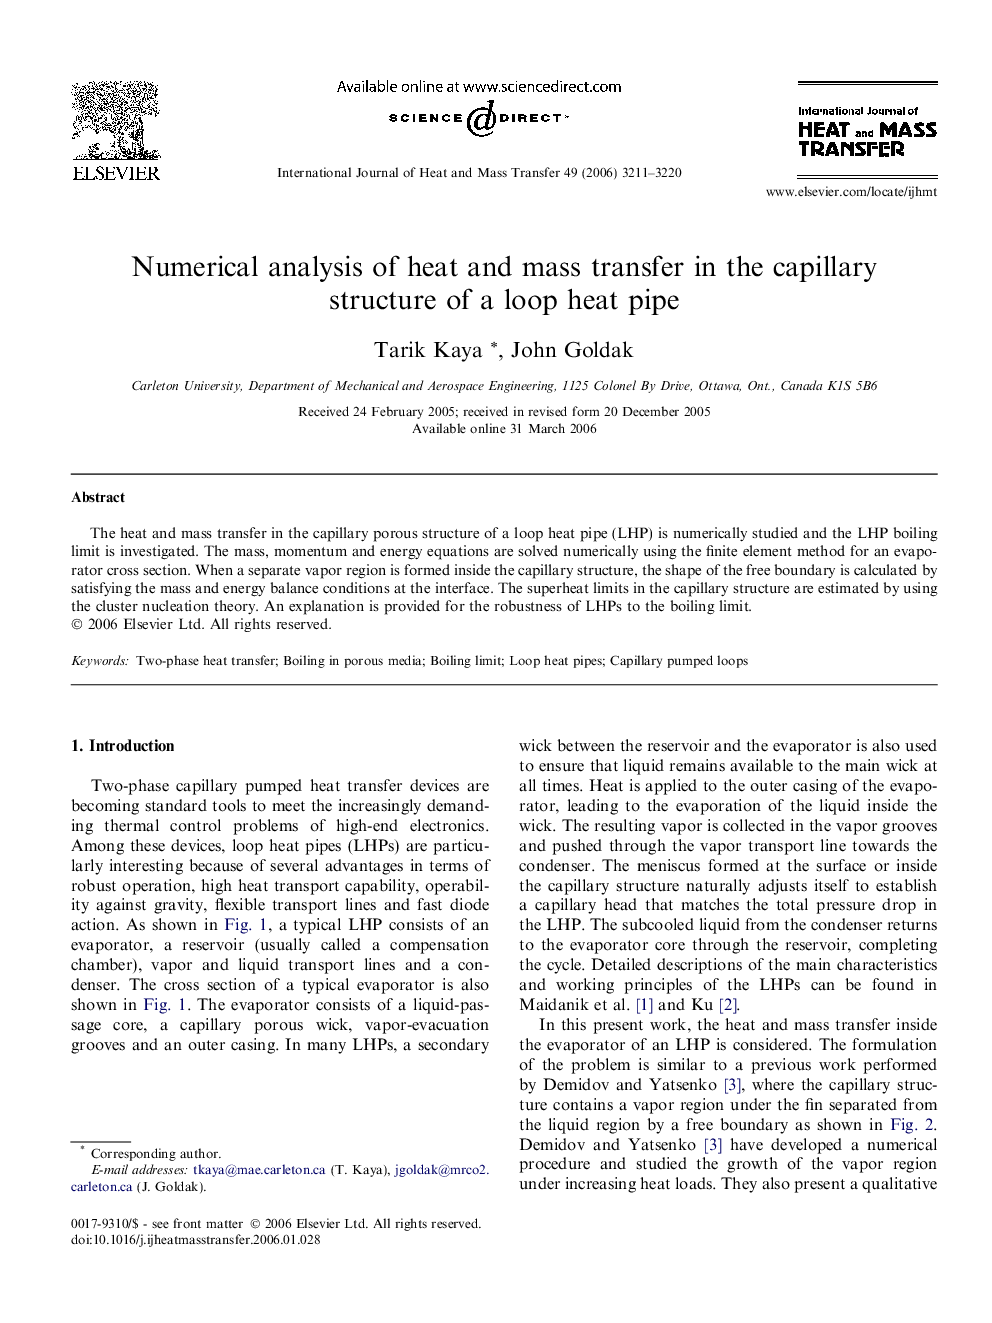 Numerical analysis of heat and mass transfer in the capillary structure of a loop heat pipe